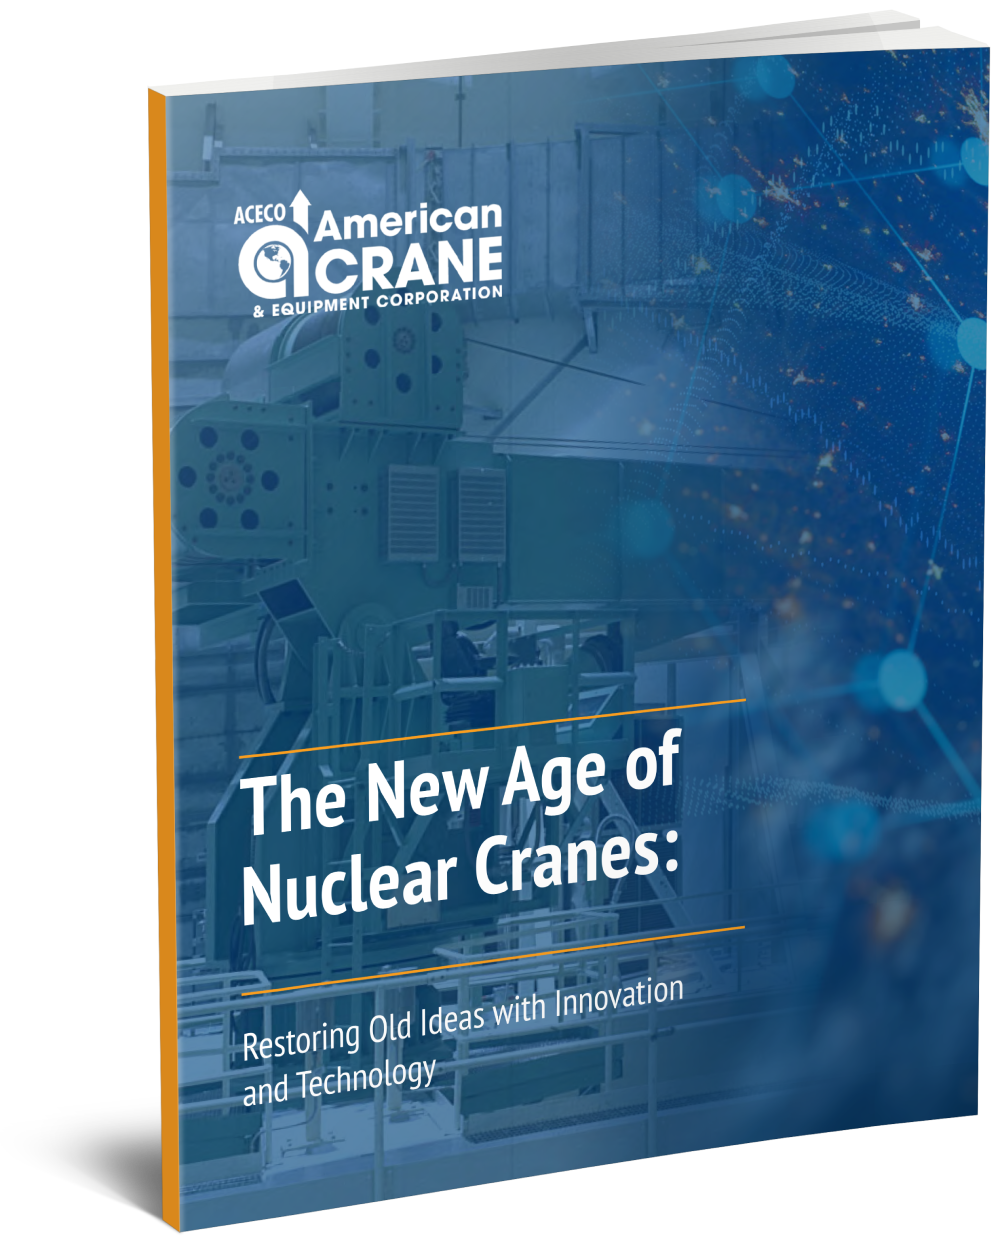 The New Age Nuclear Cranes